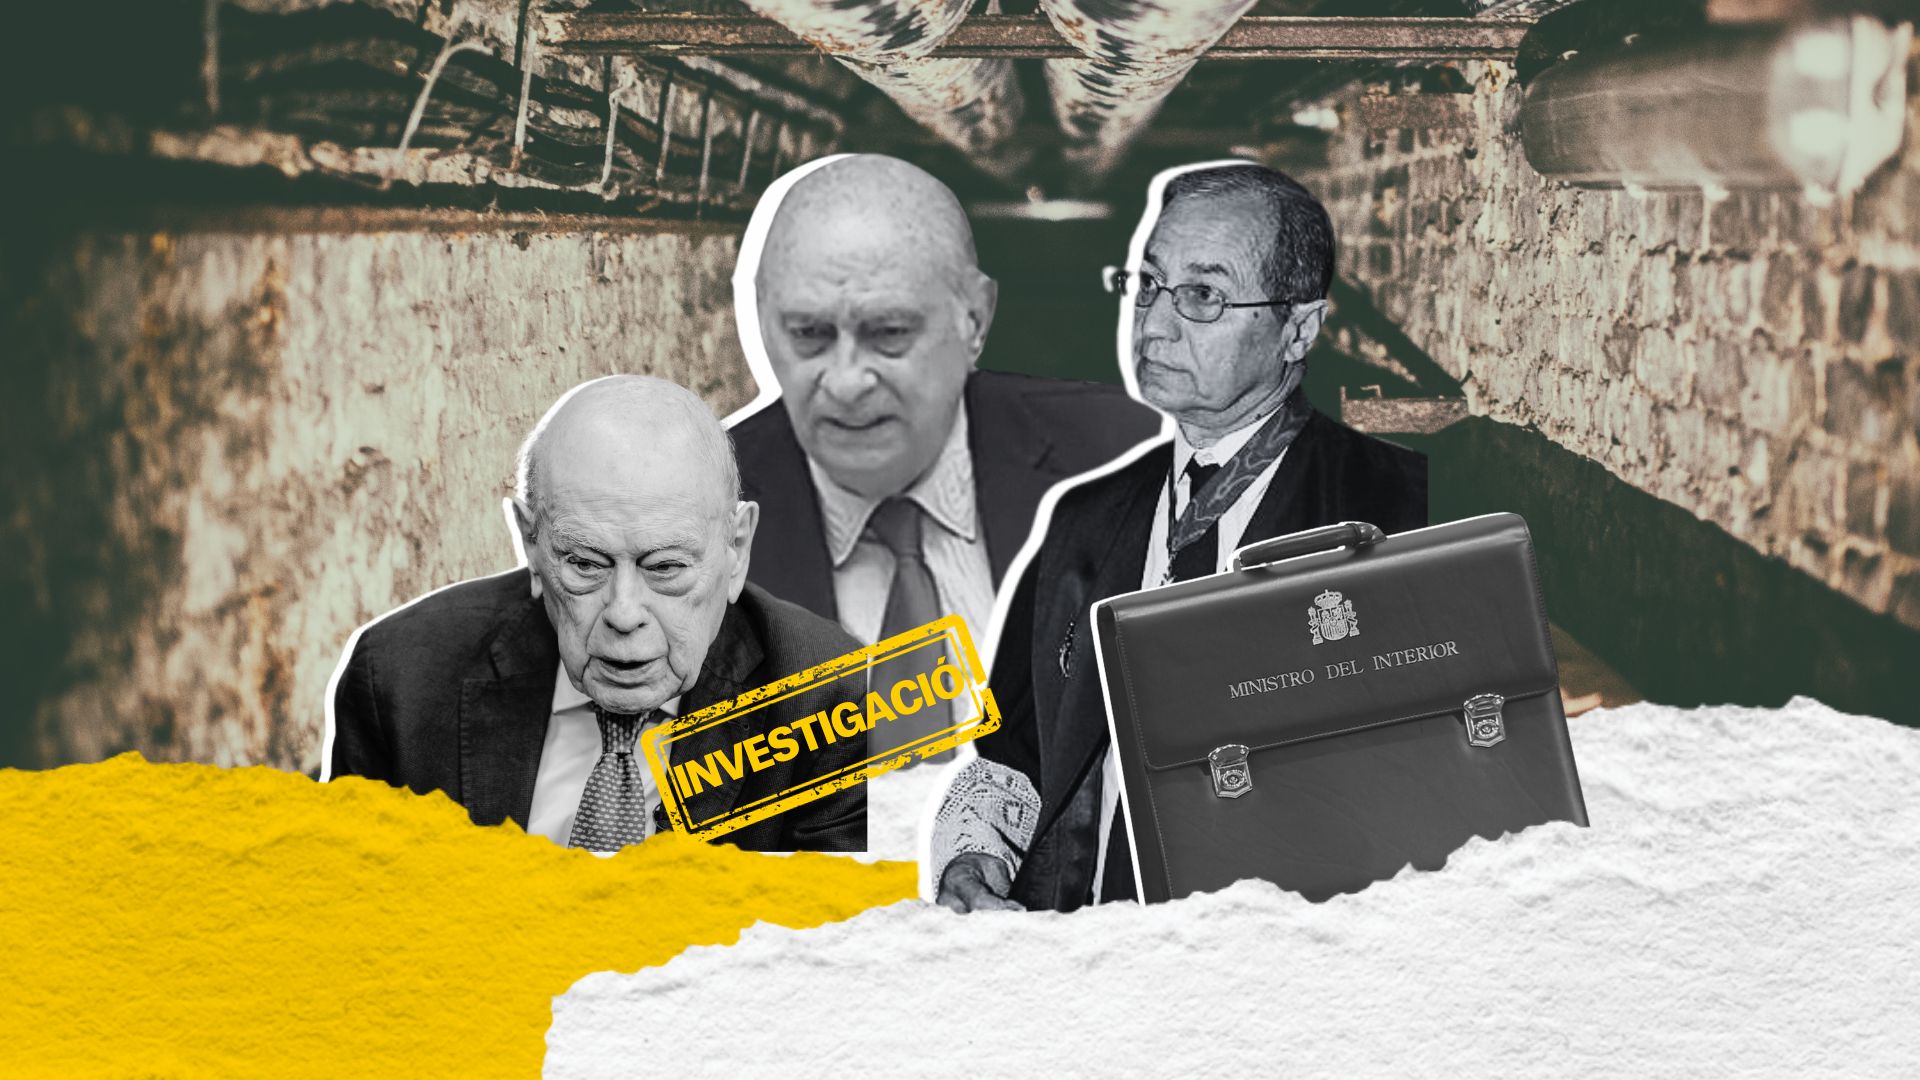 The Spanish interior ministry document that set the lines for investigation of the Pujol family